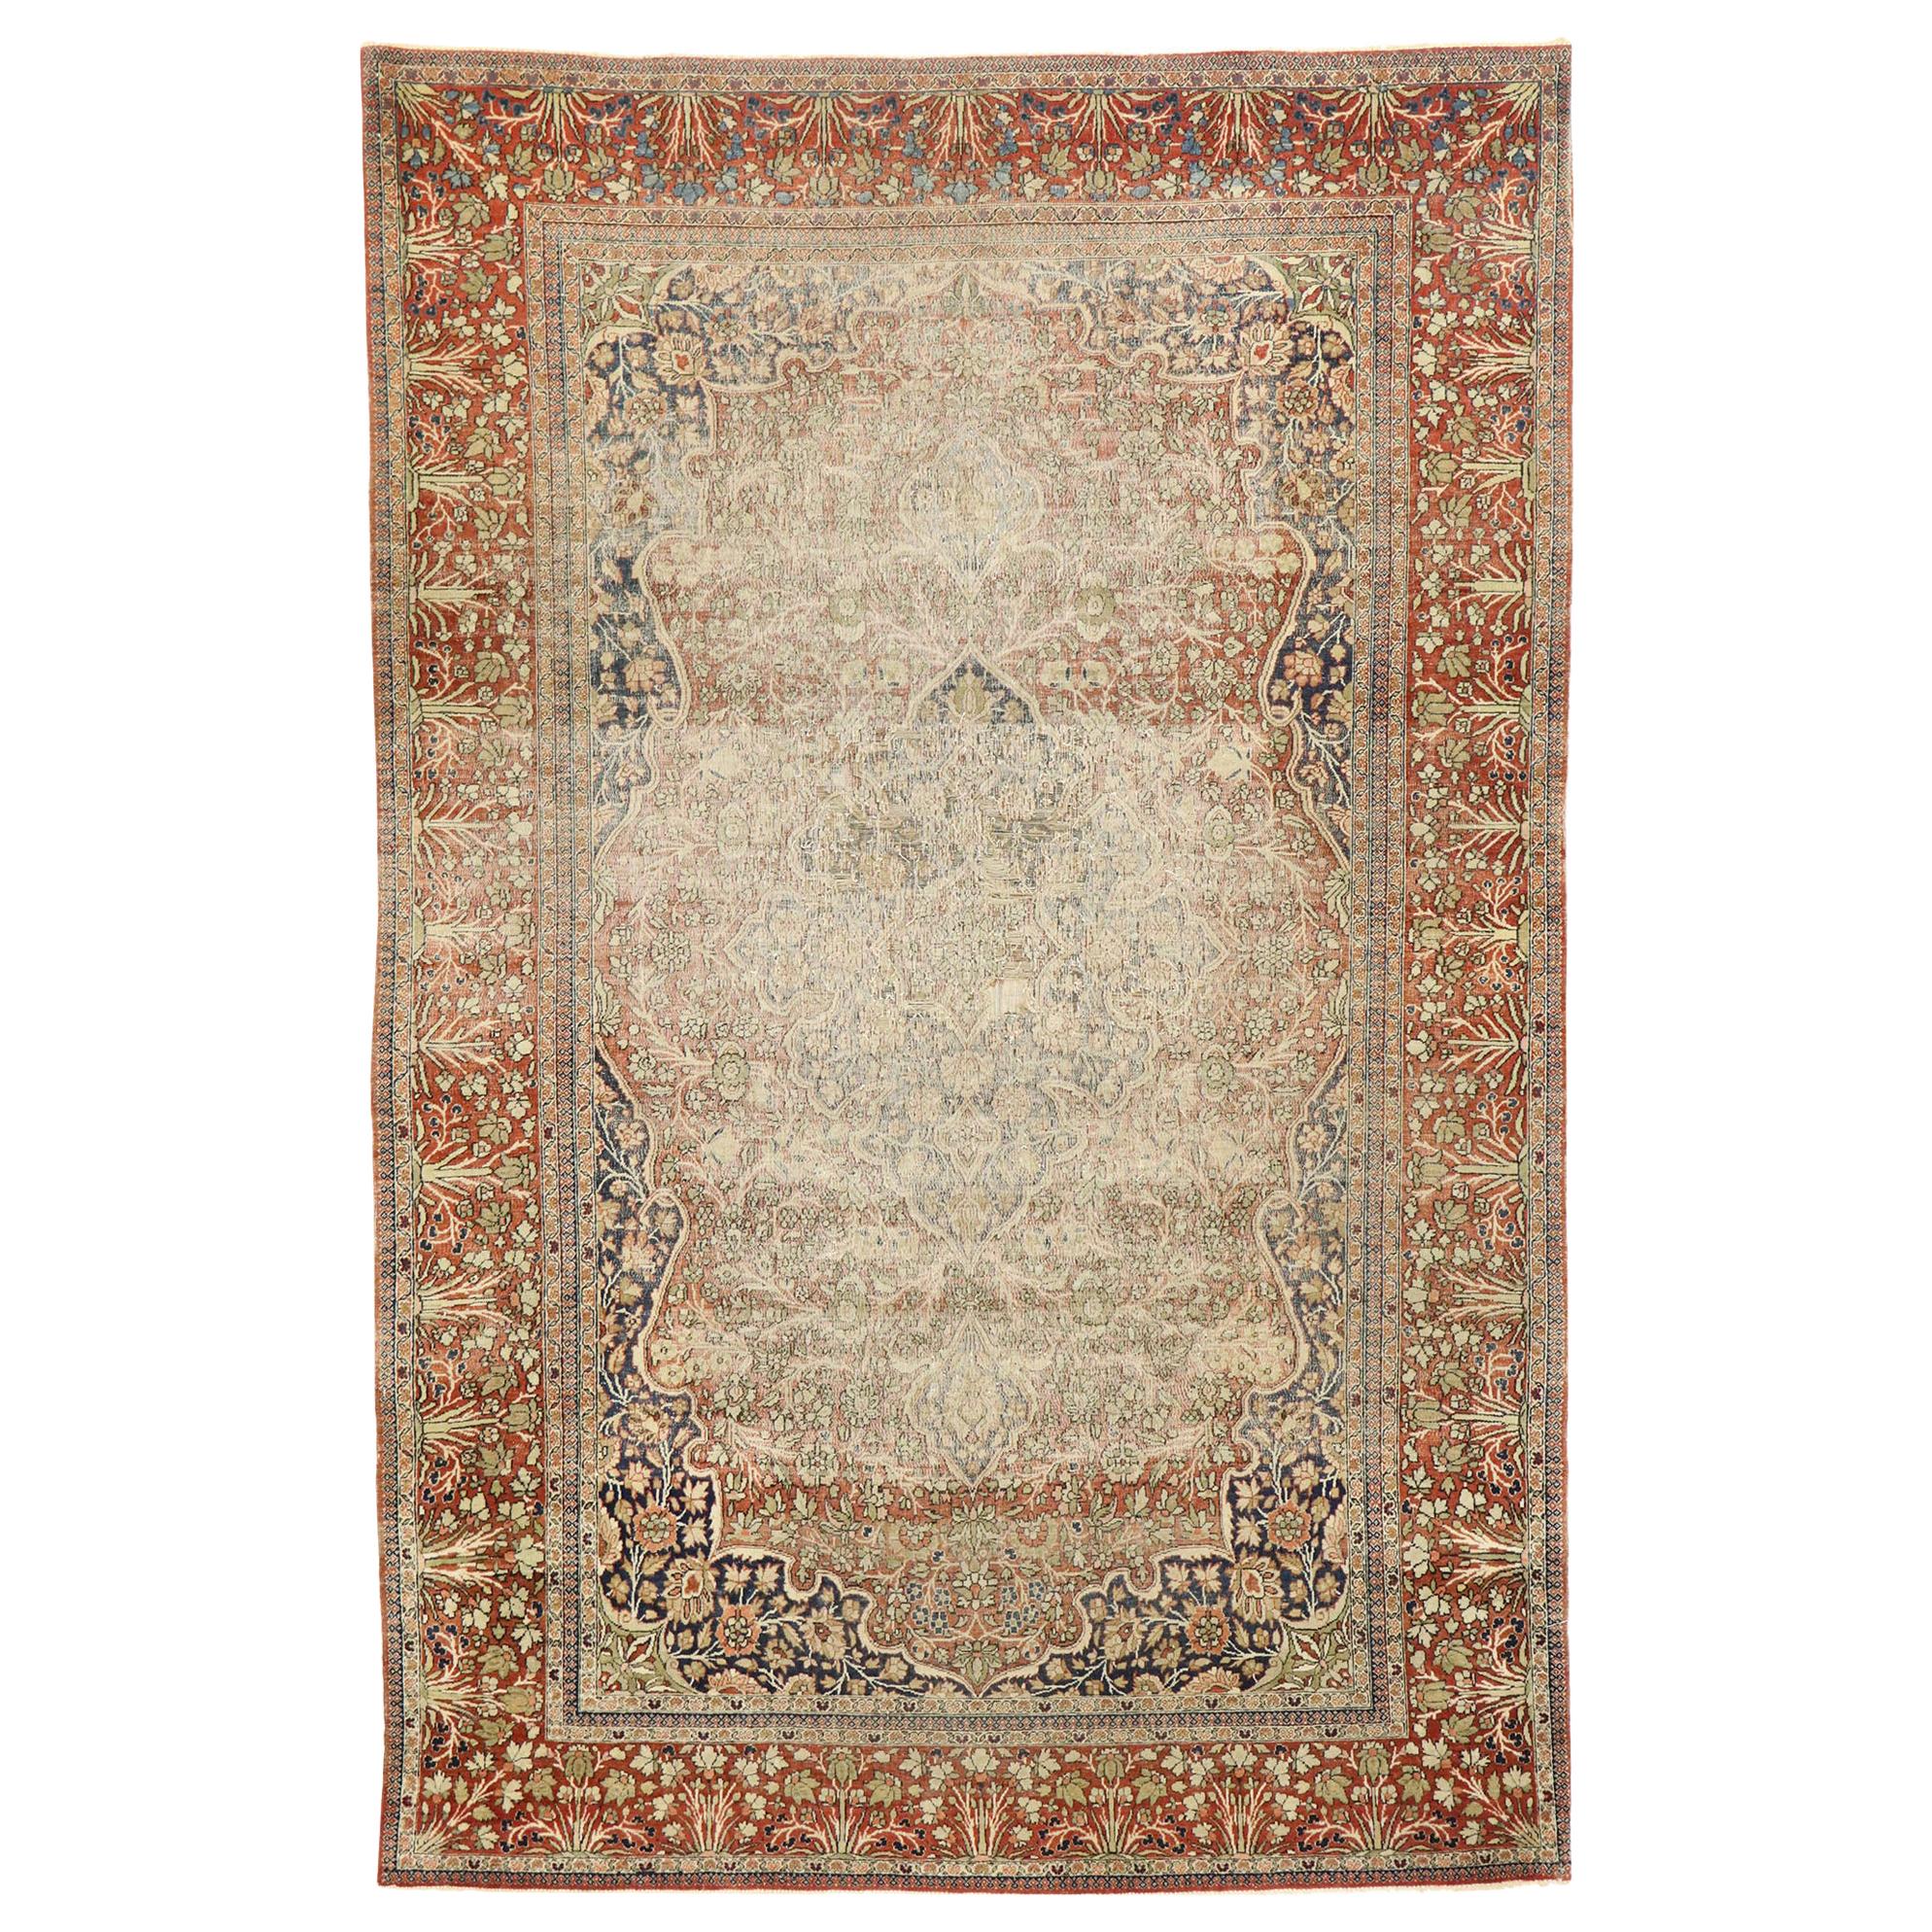 Distressed Antique Persian Mohtesham Kashan Rug with Modern Rustic English Style